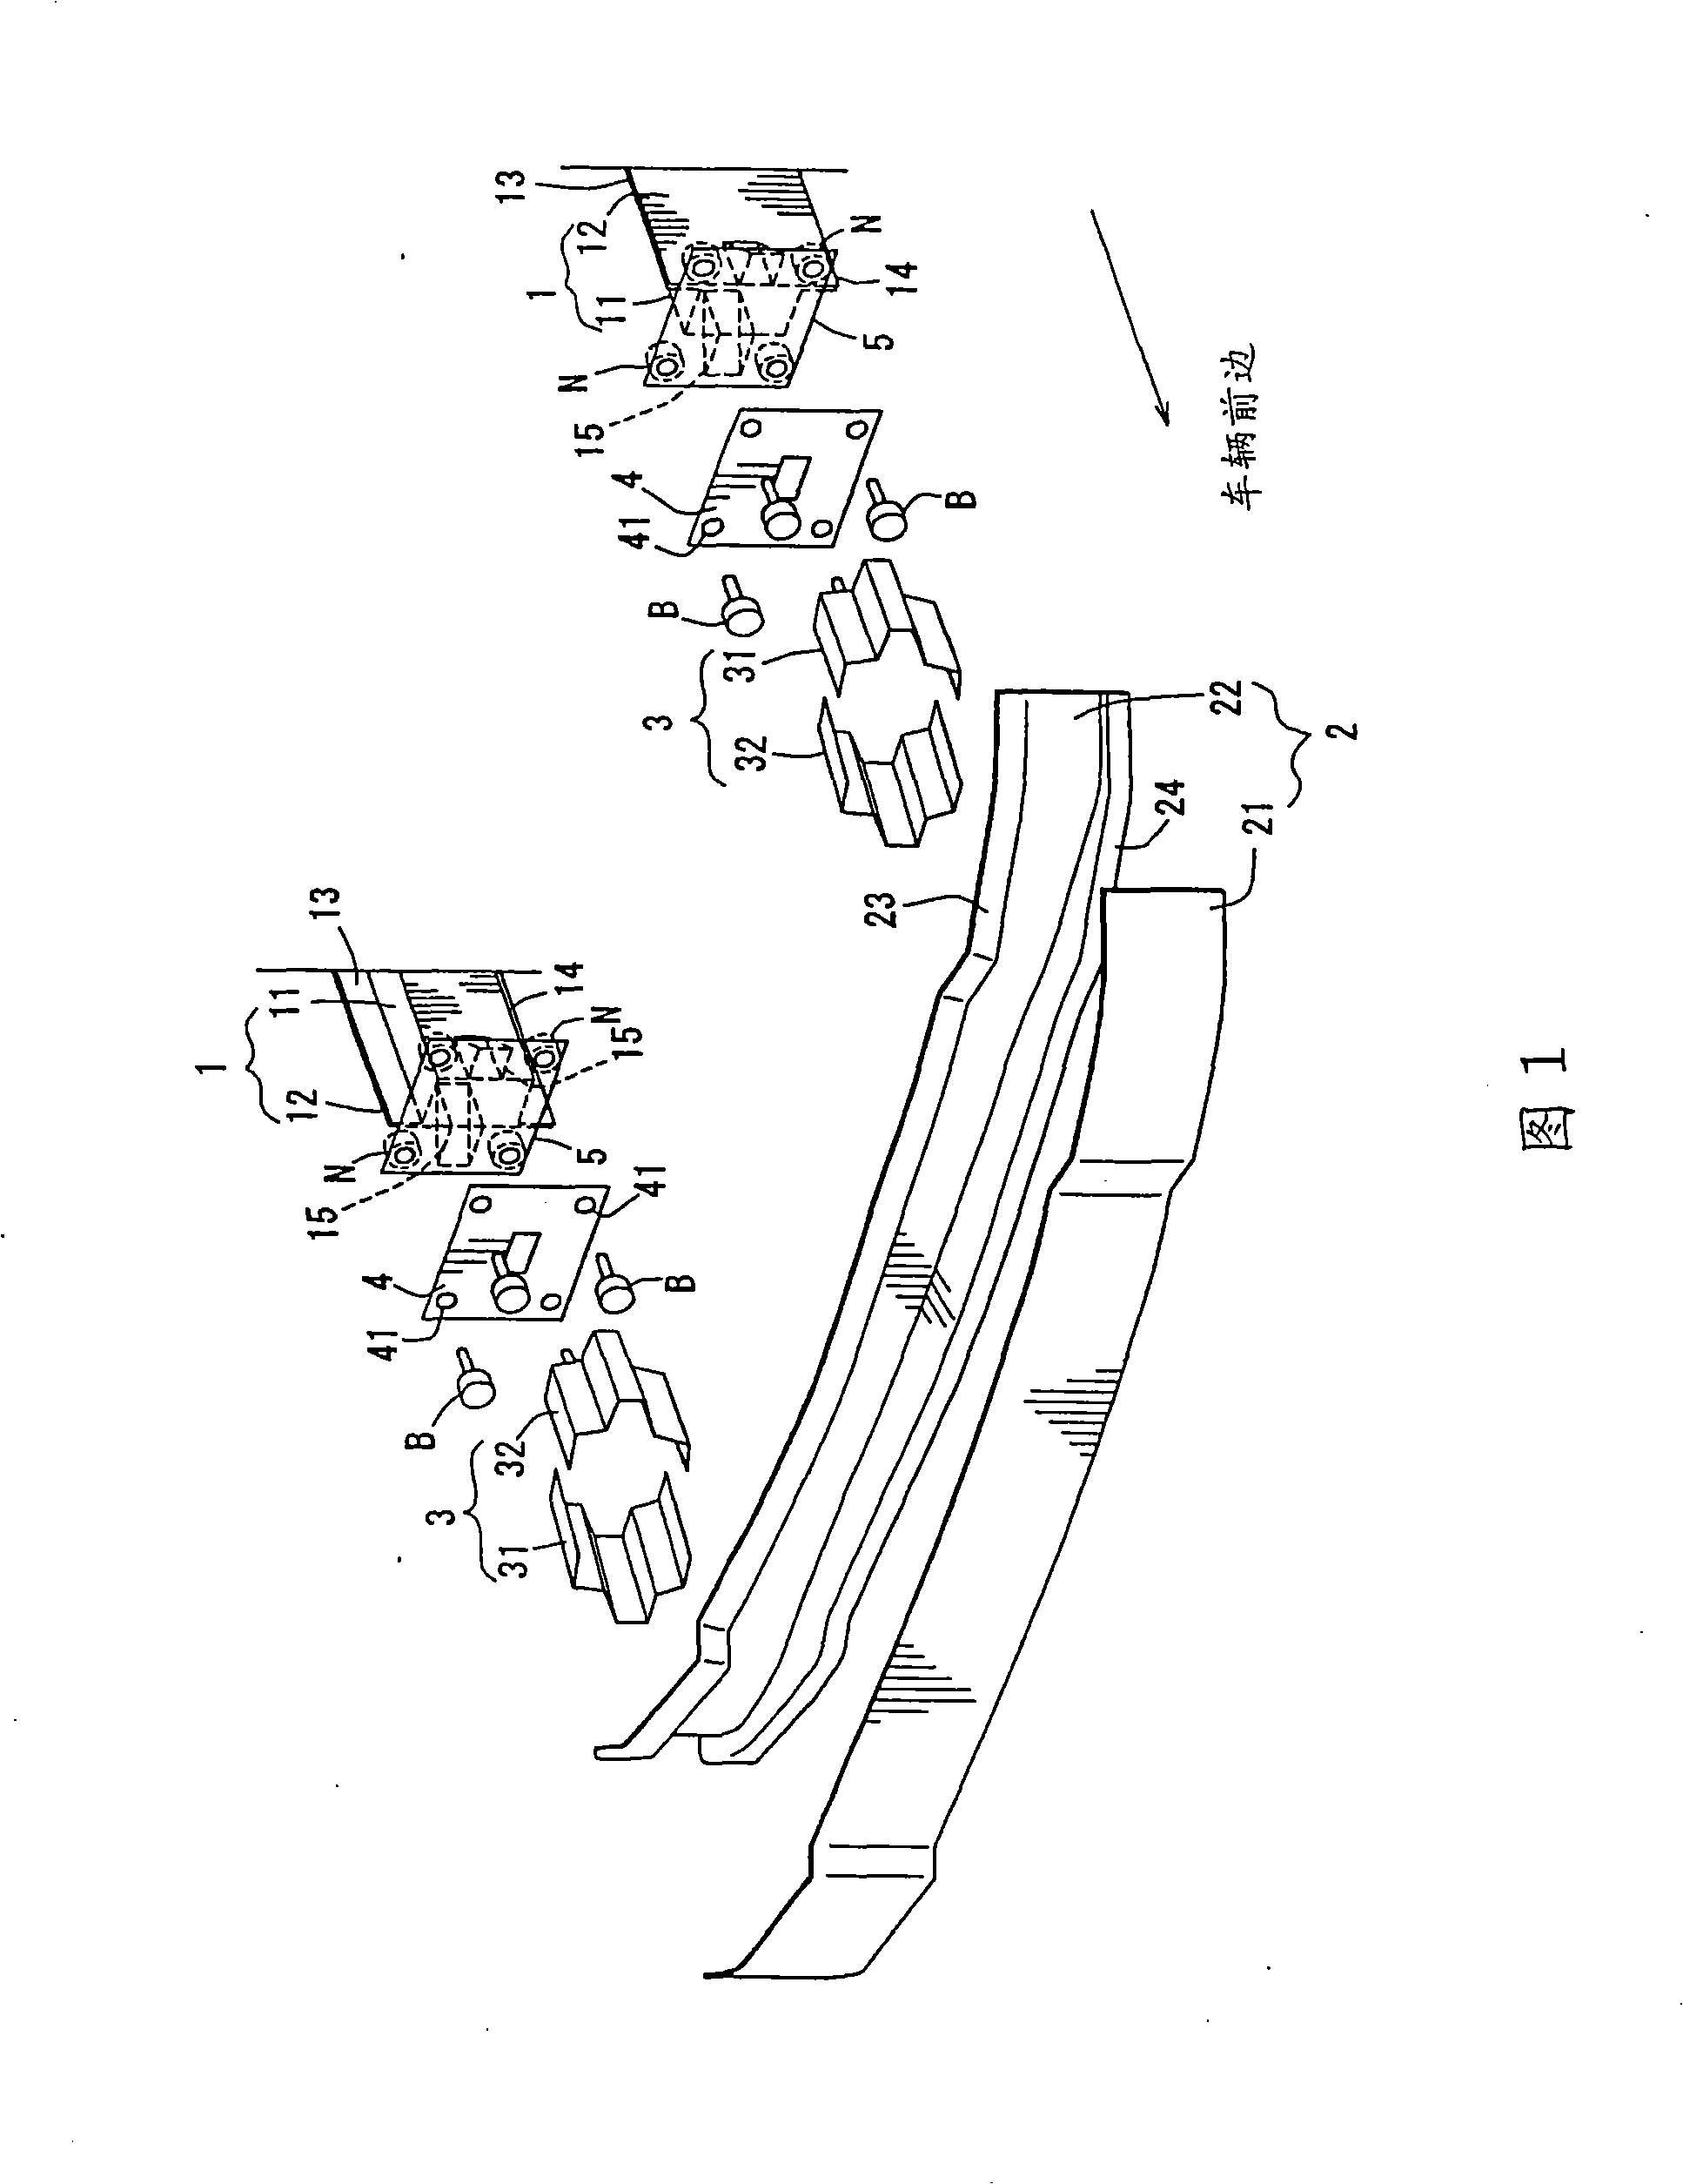 Vehicle structure for automobile